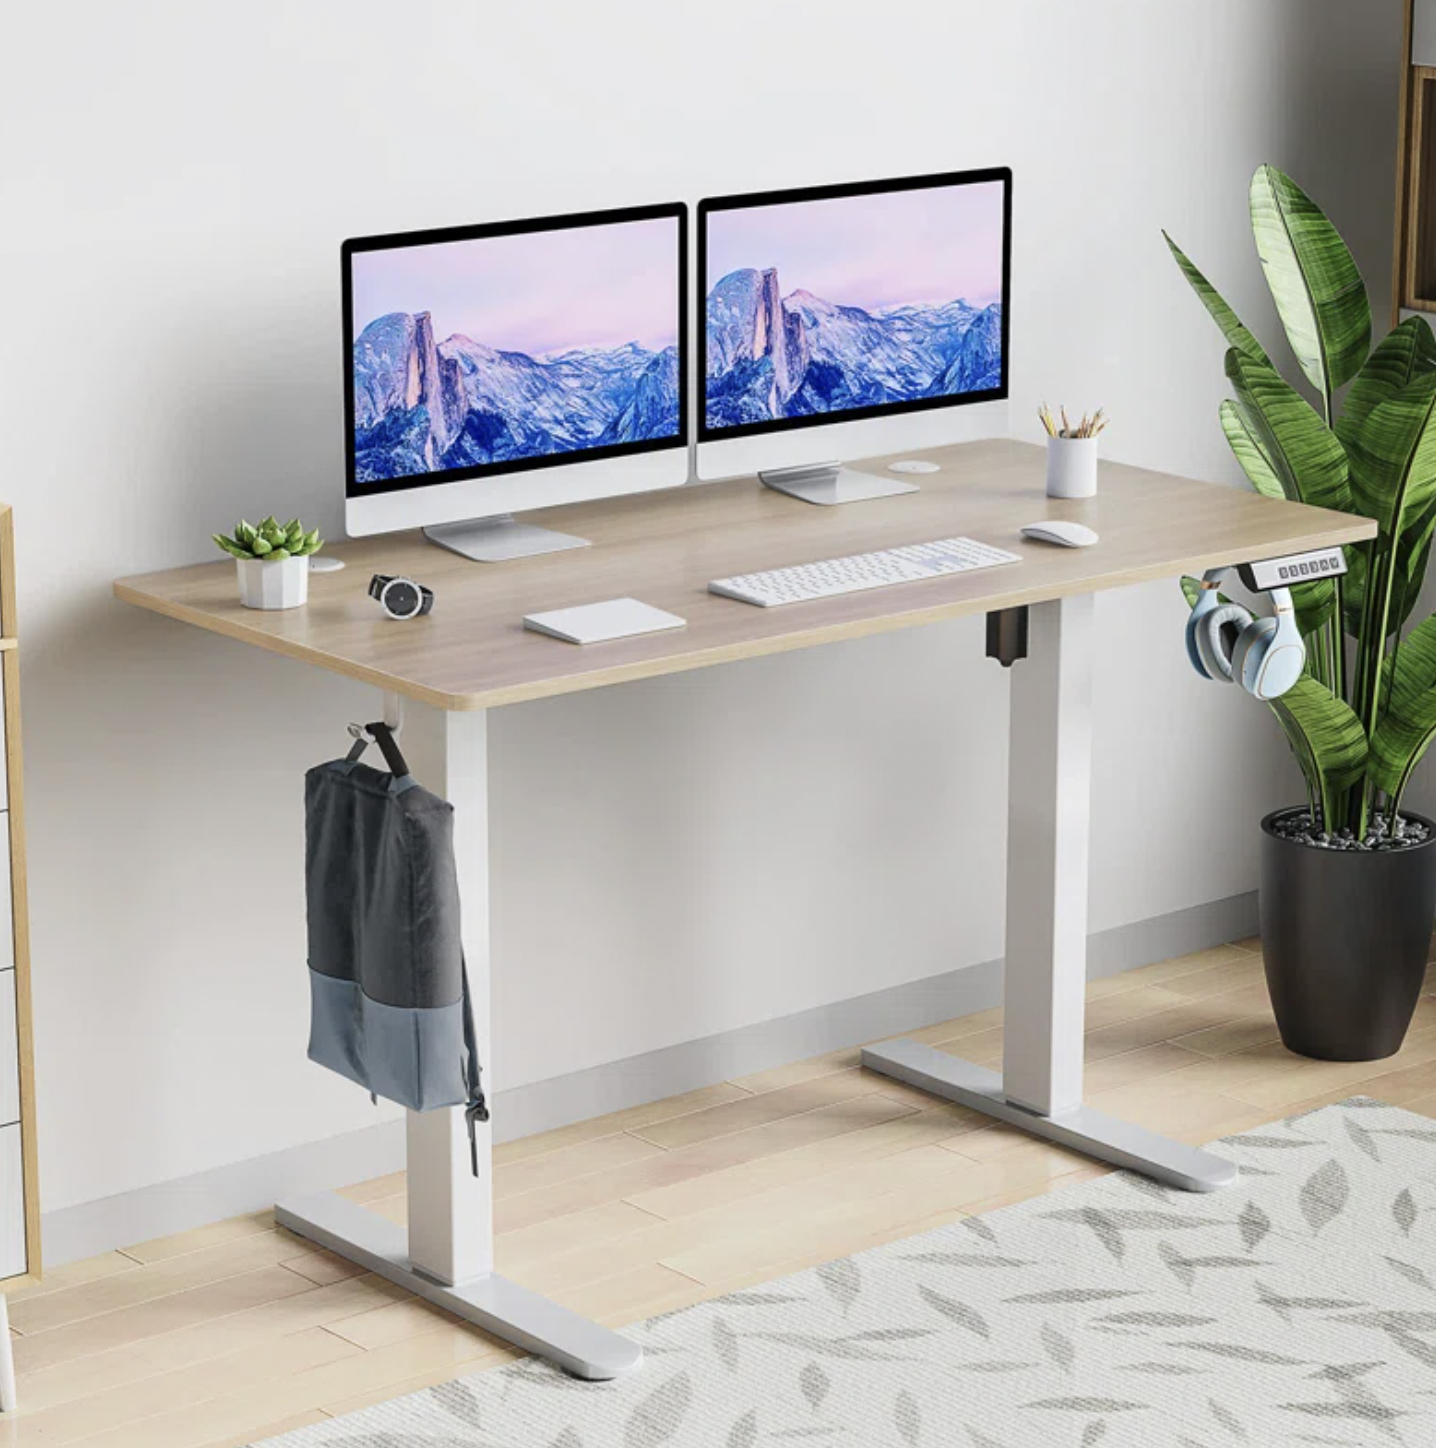 The beige desk with two monitors on it in middle height position